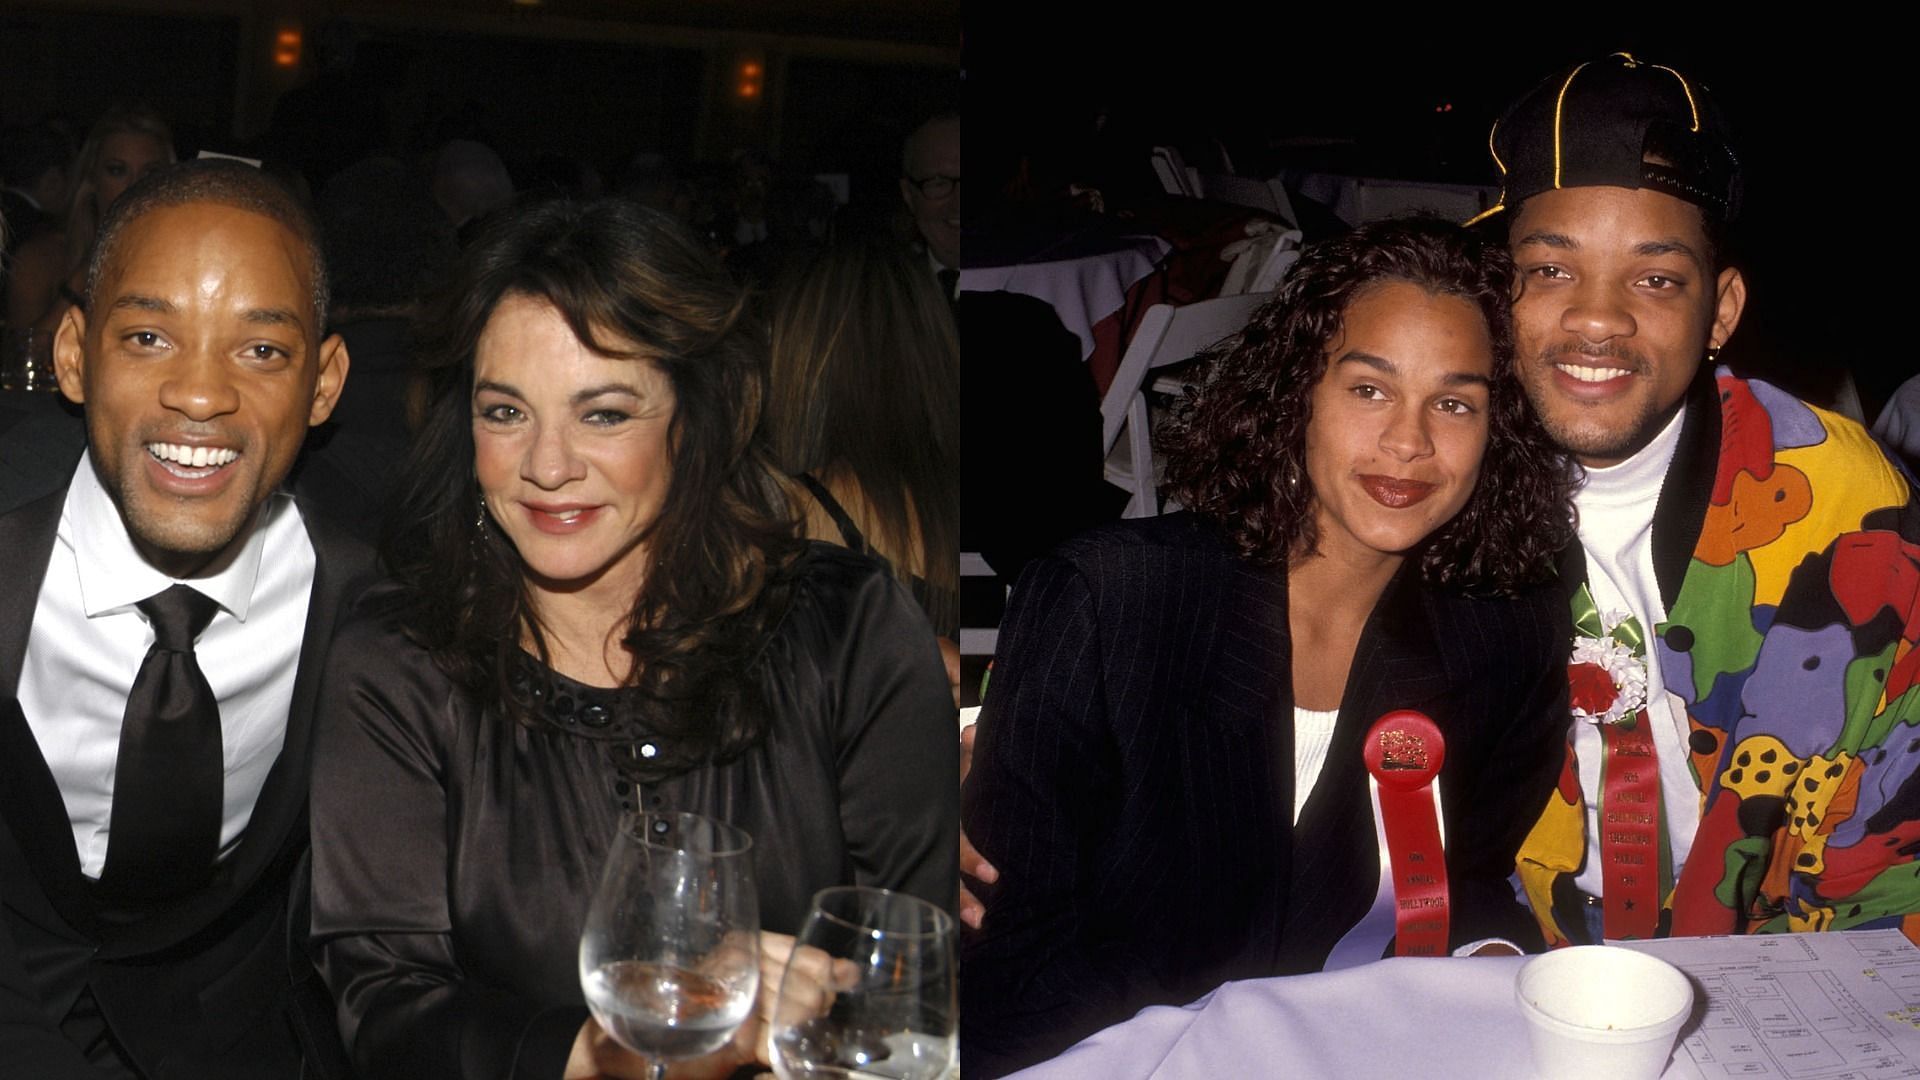 Will Smith reveals he &quot;fell in love&quot; co-star Stockard Channing while he was married he Sheree Zampino (Image via Getty Images)